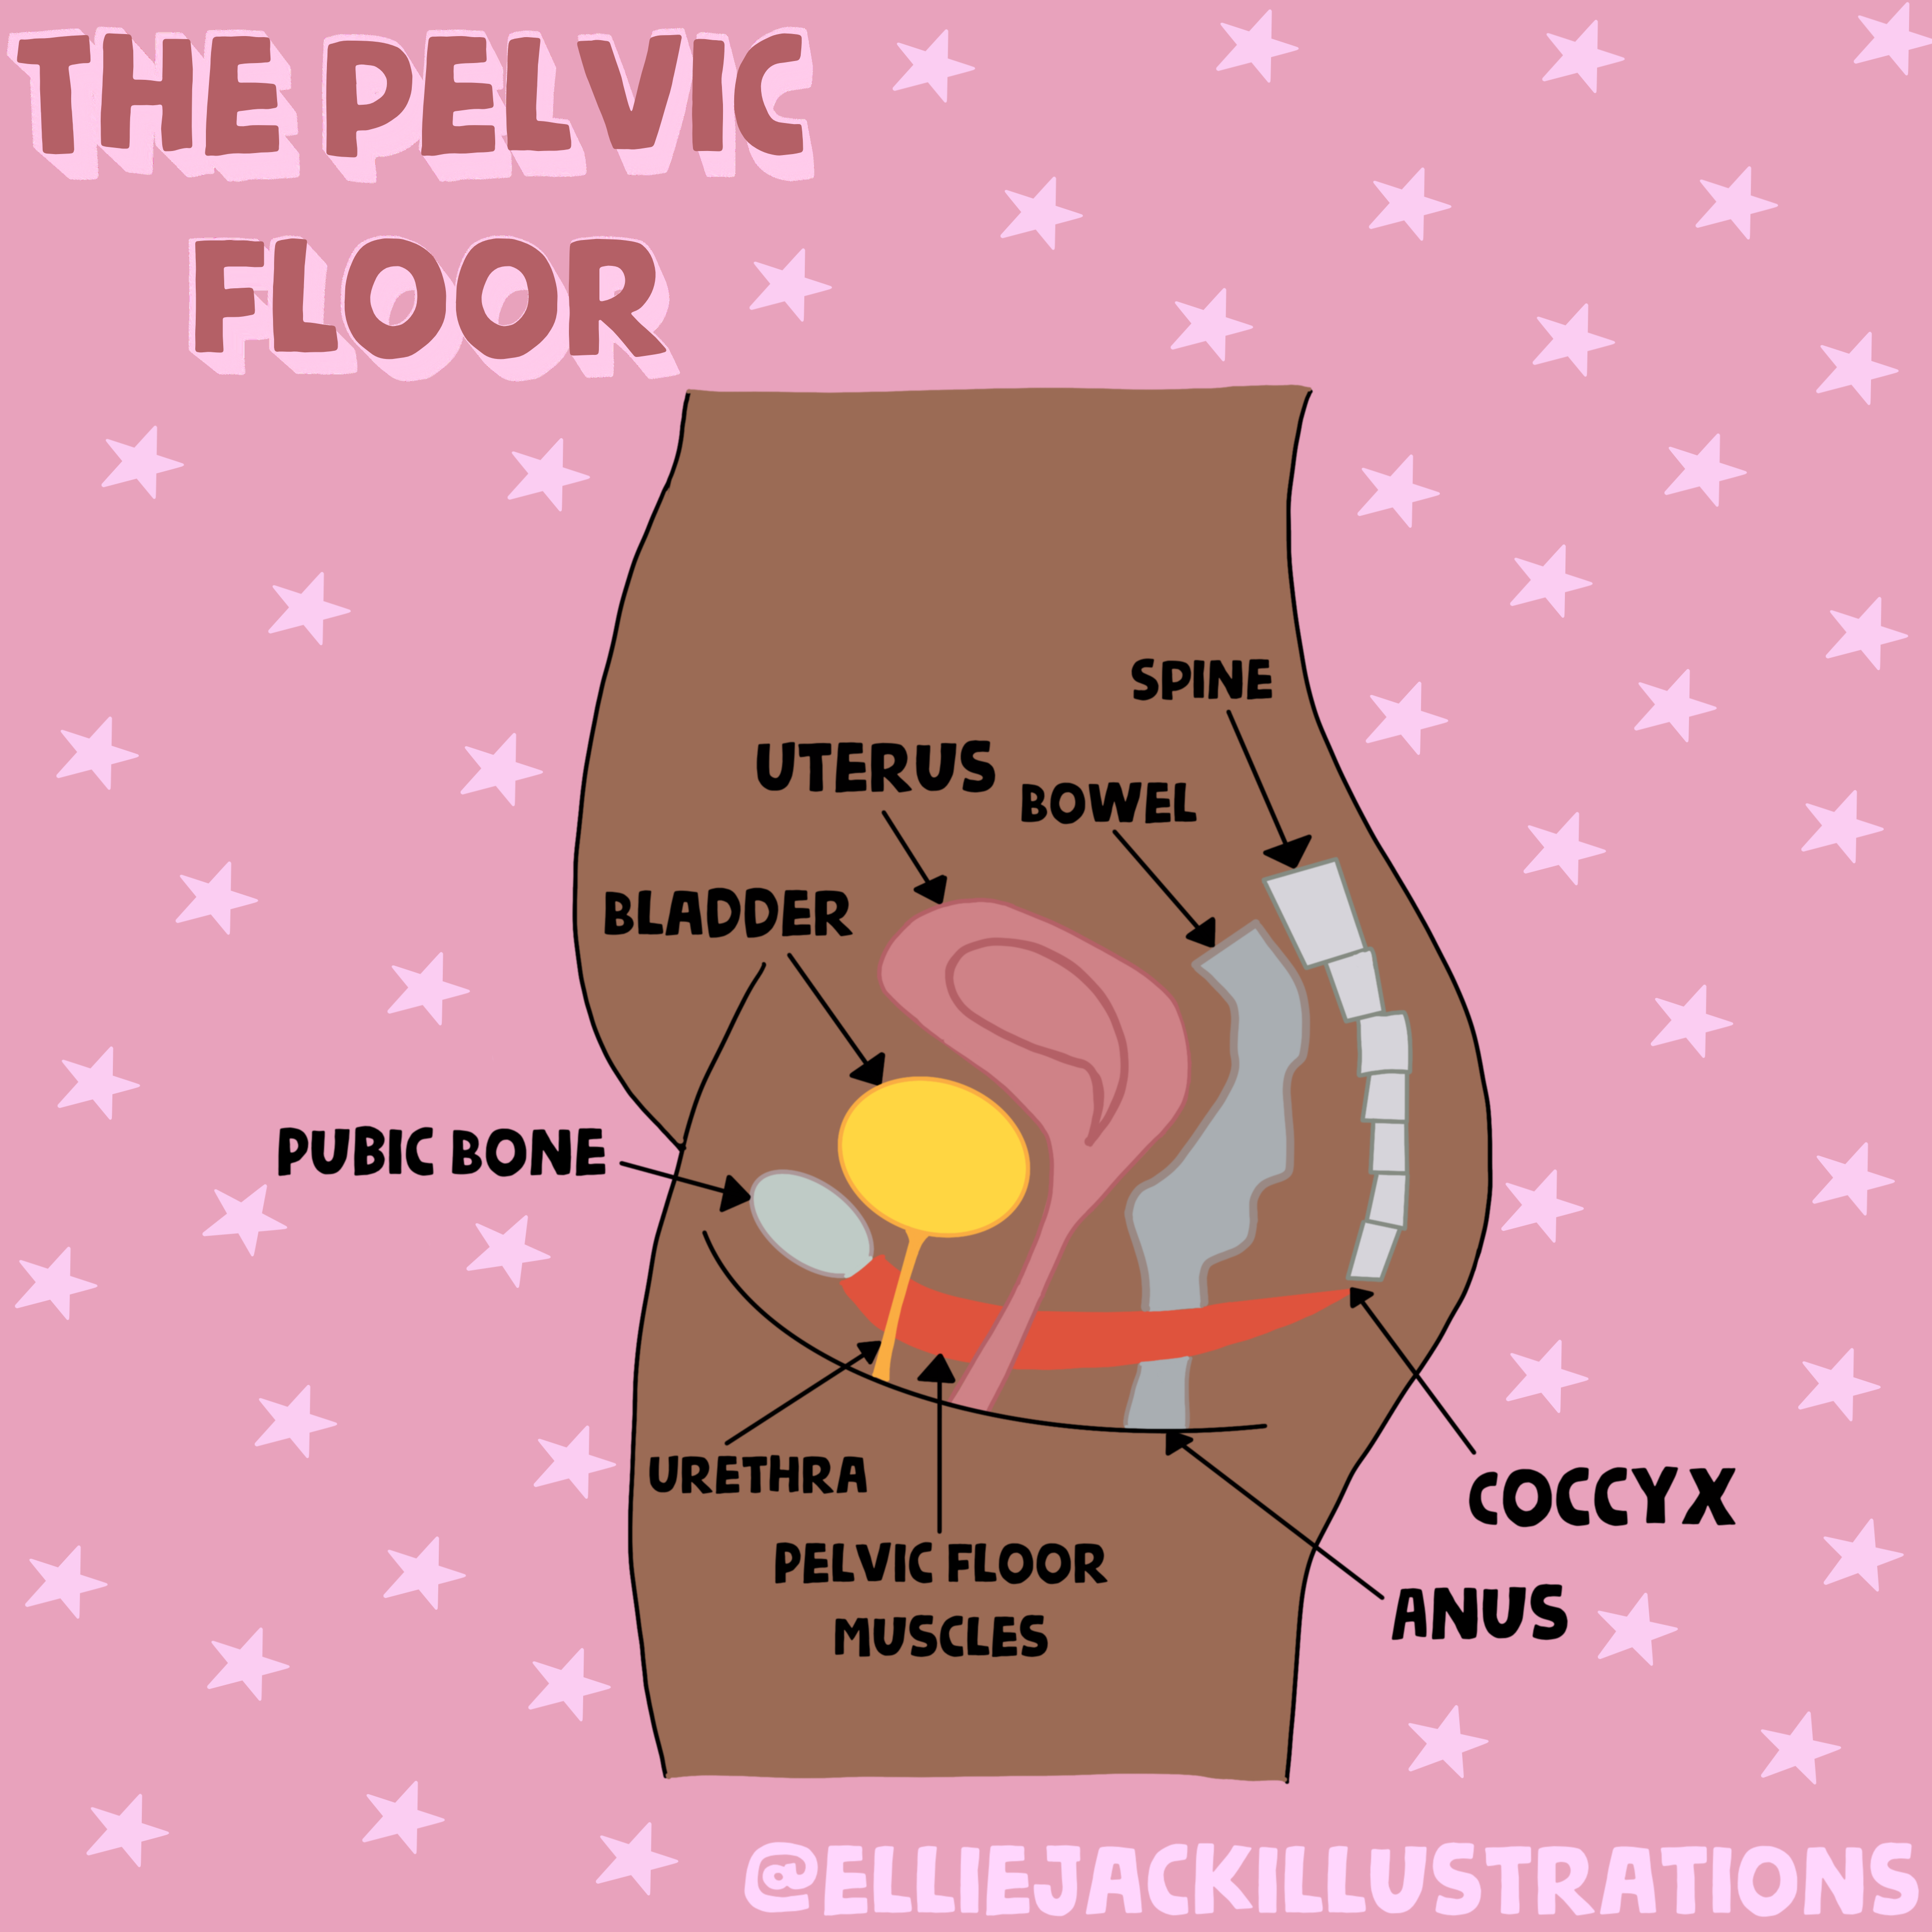 Pelvic Floor 101: Everything you need to know about the pelvic